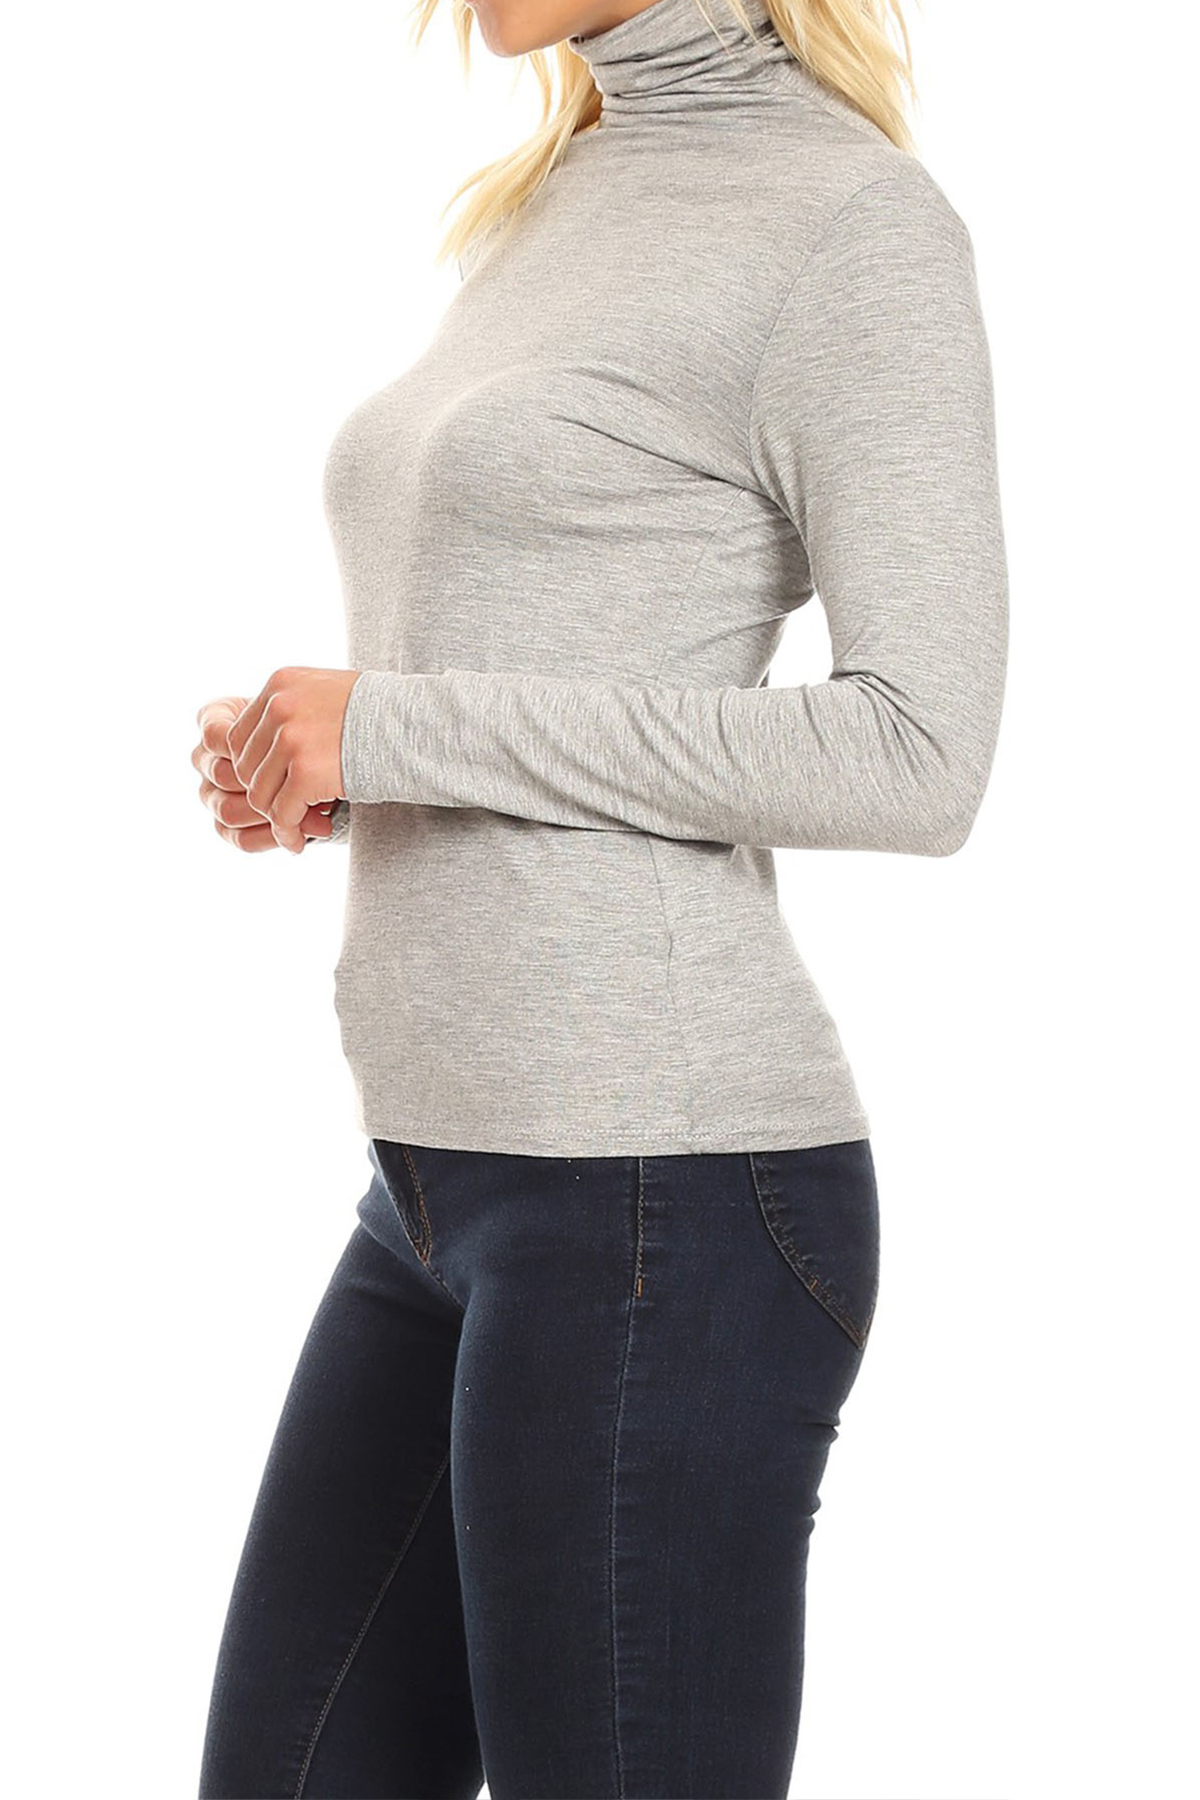 Women's Casual Solid Long Sleeve Fitted Turtleneck Sweater Top ...